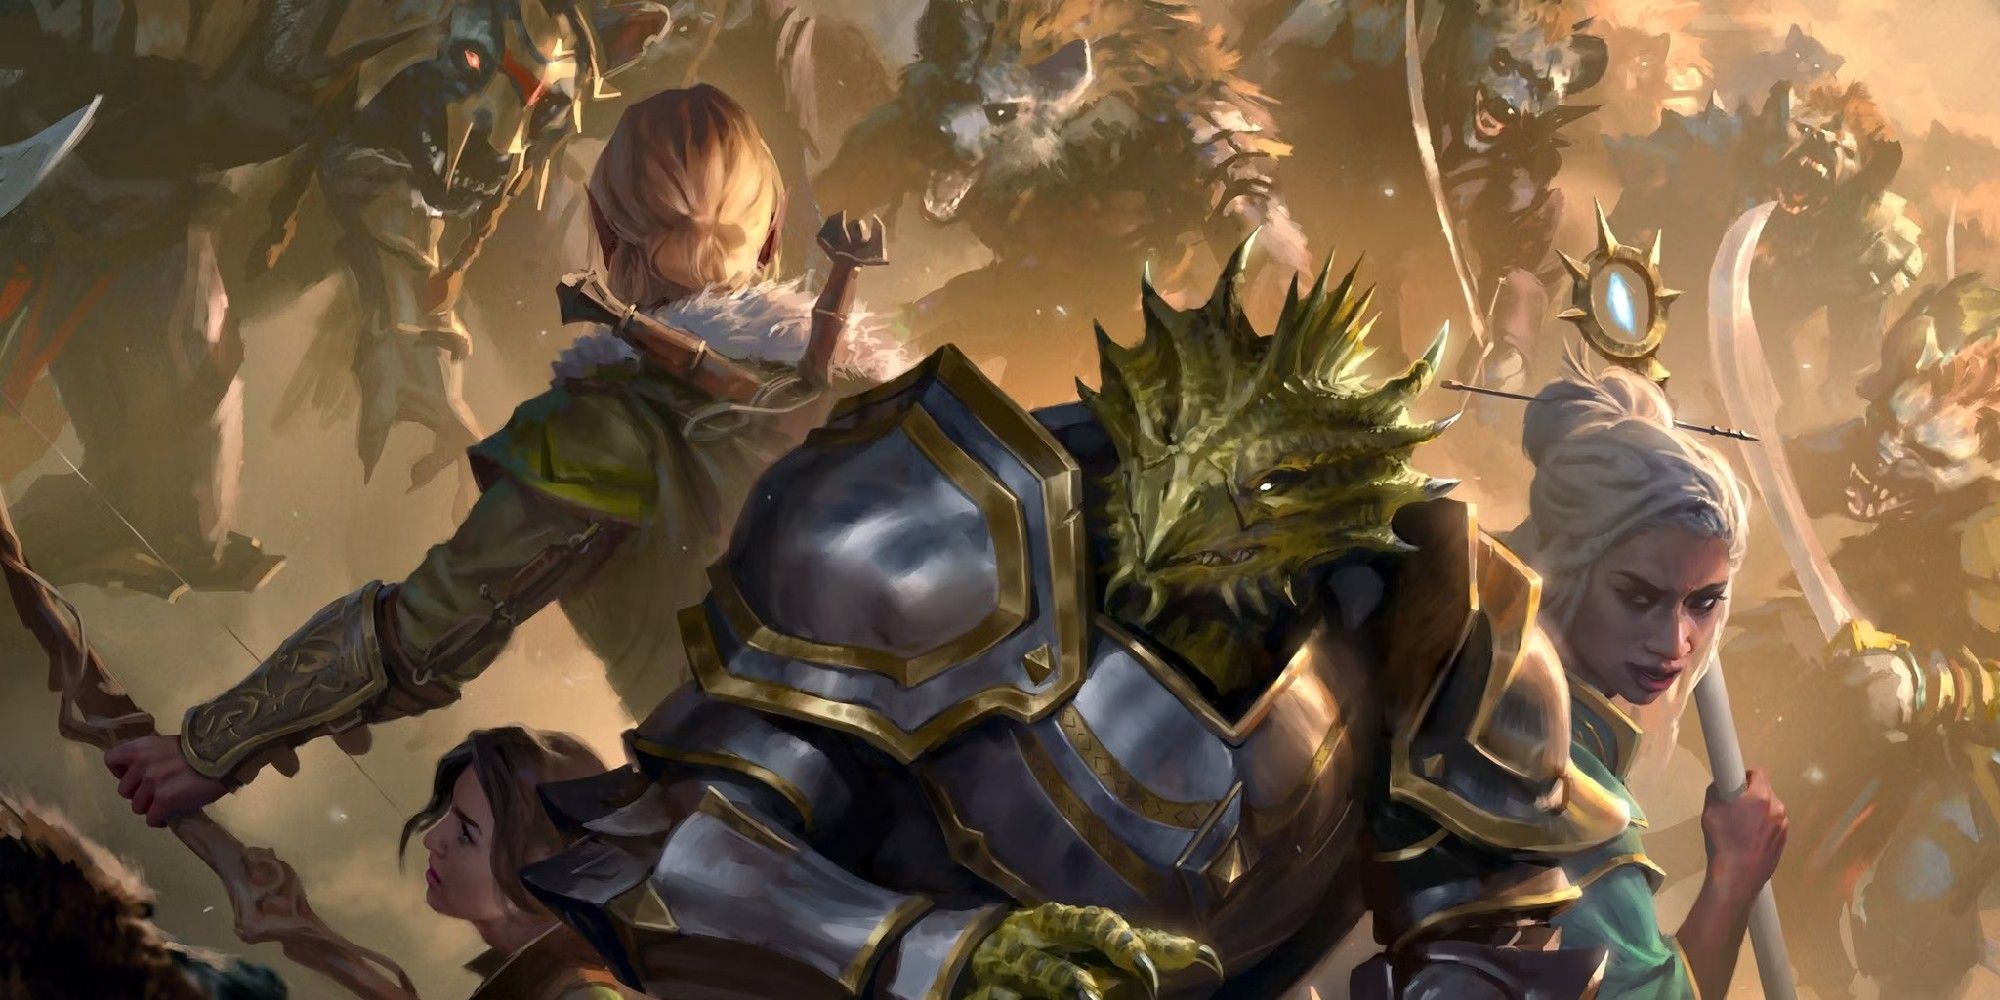 Dungeons & Dragons image showing a party of three players being surrounded by Gnolls